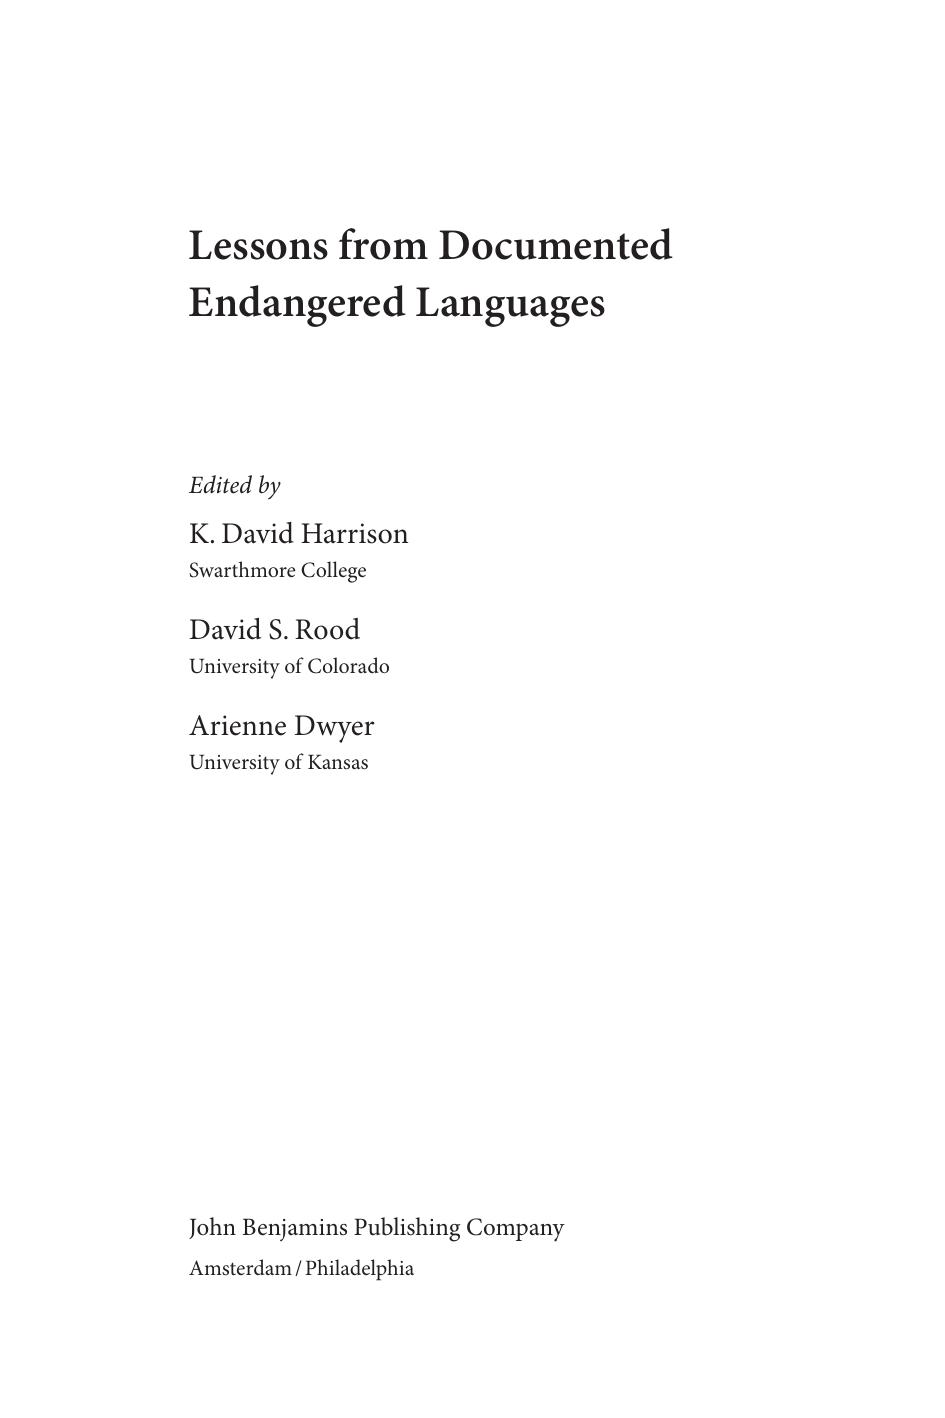 Lessons From Documented Endangered Languages